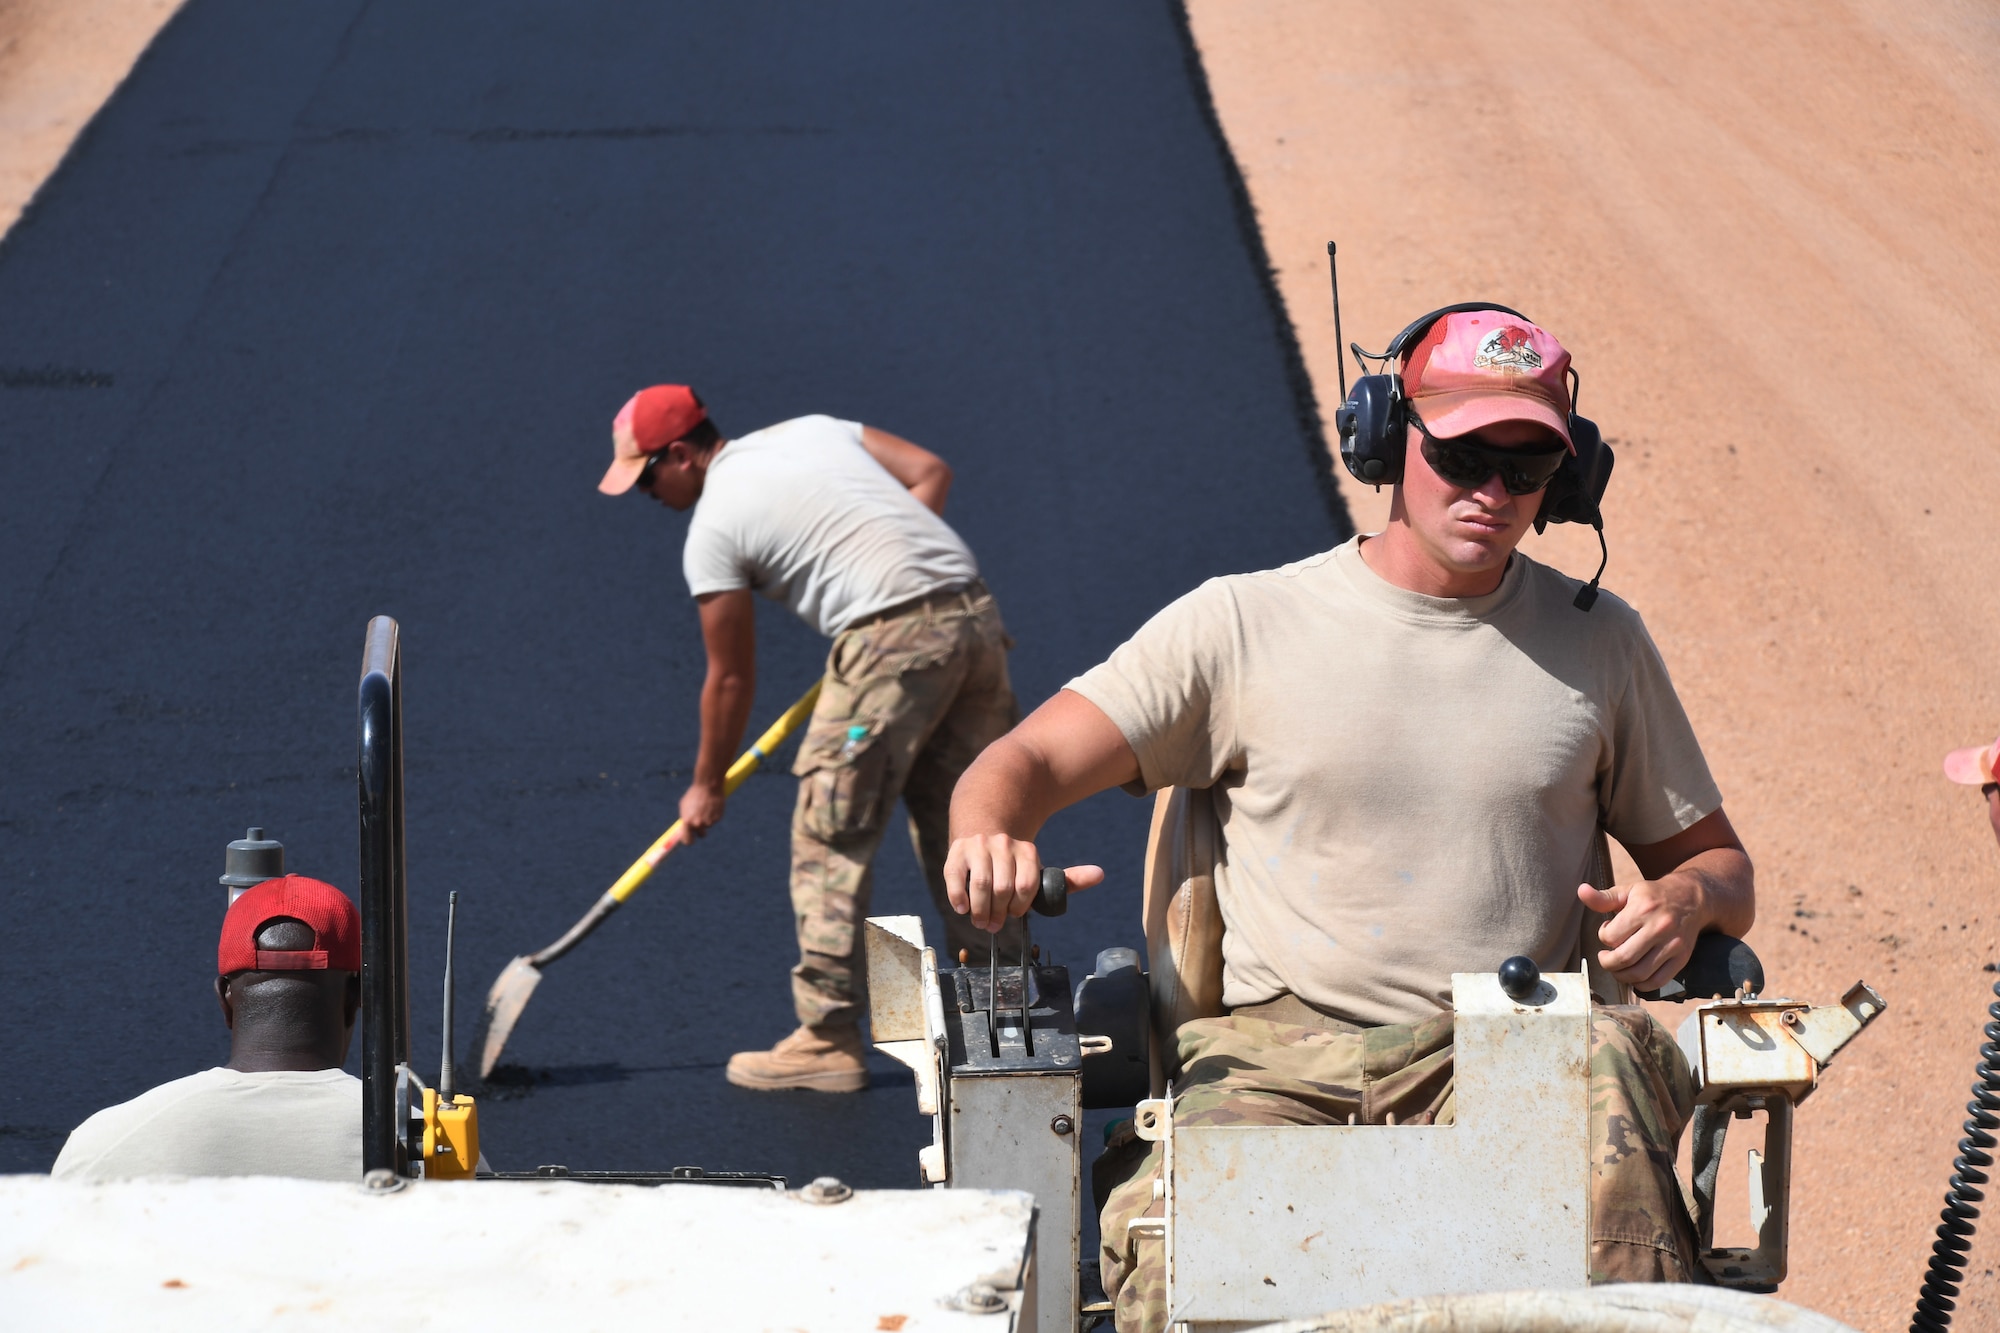 U.S. Air Force Staff Sgt. Channing Henry, 31st Expeditionary Rapid Engineer Deployable Heavy Operation Repair Squadron Engineer pavement and equipment journeyman, operates an asphalt paver on a test strip at Nigerien Air Base 201, Niger, Oct. 19, 2018. Airmen evaluate the equipment and materials several times before laying down the actual runway. (U.S. Air Force photo by Tech. Sgt. Rachelle Coleman)